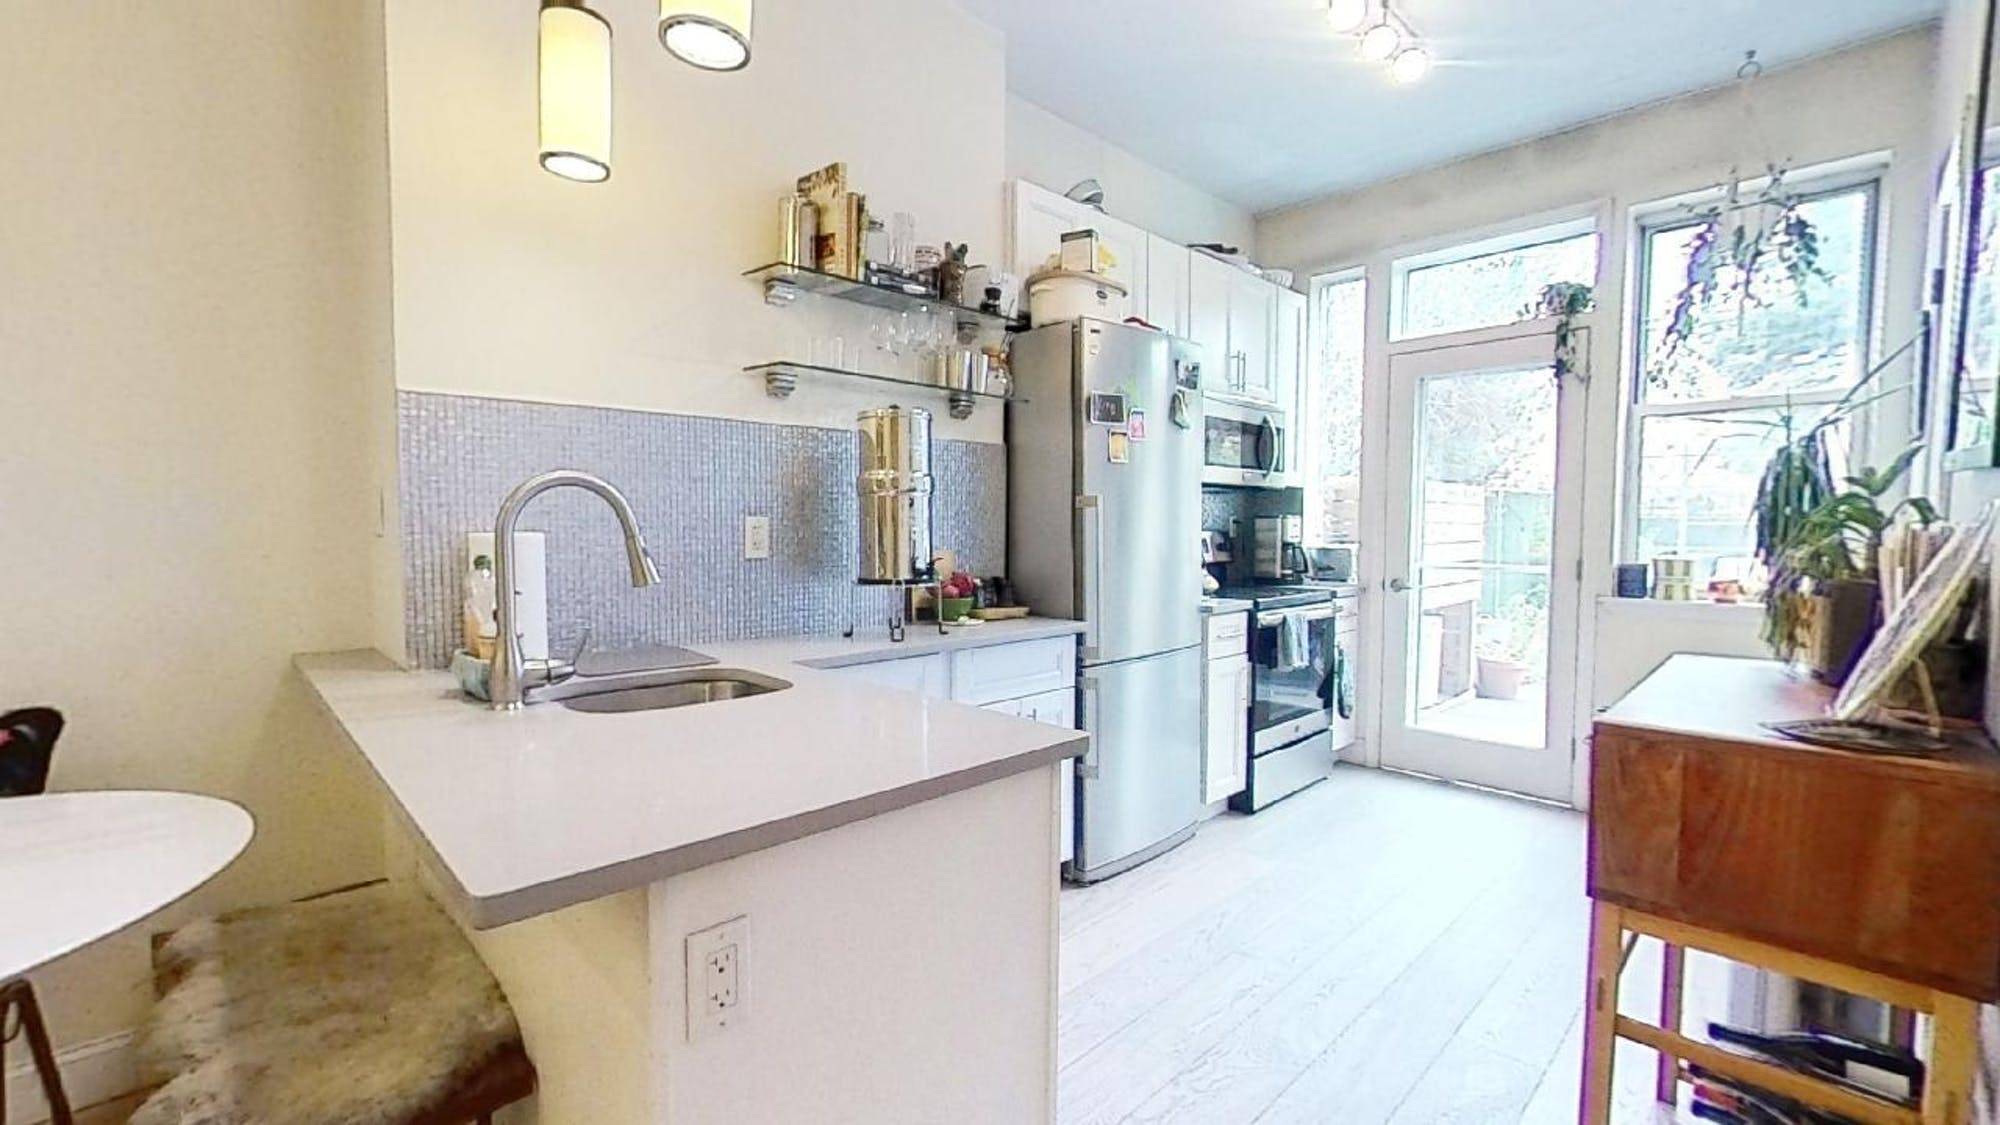 VR TOUR AVAILABLE NO Fee A A A Sunny One Bedroom with 500 sqft of Private Backyard in the heart of Greenpoint.